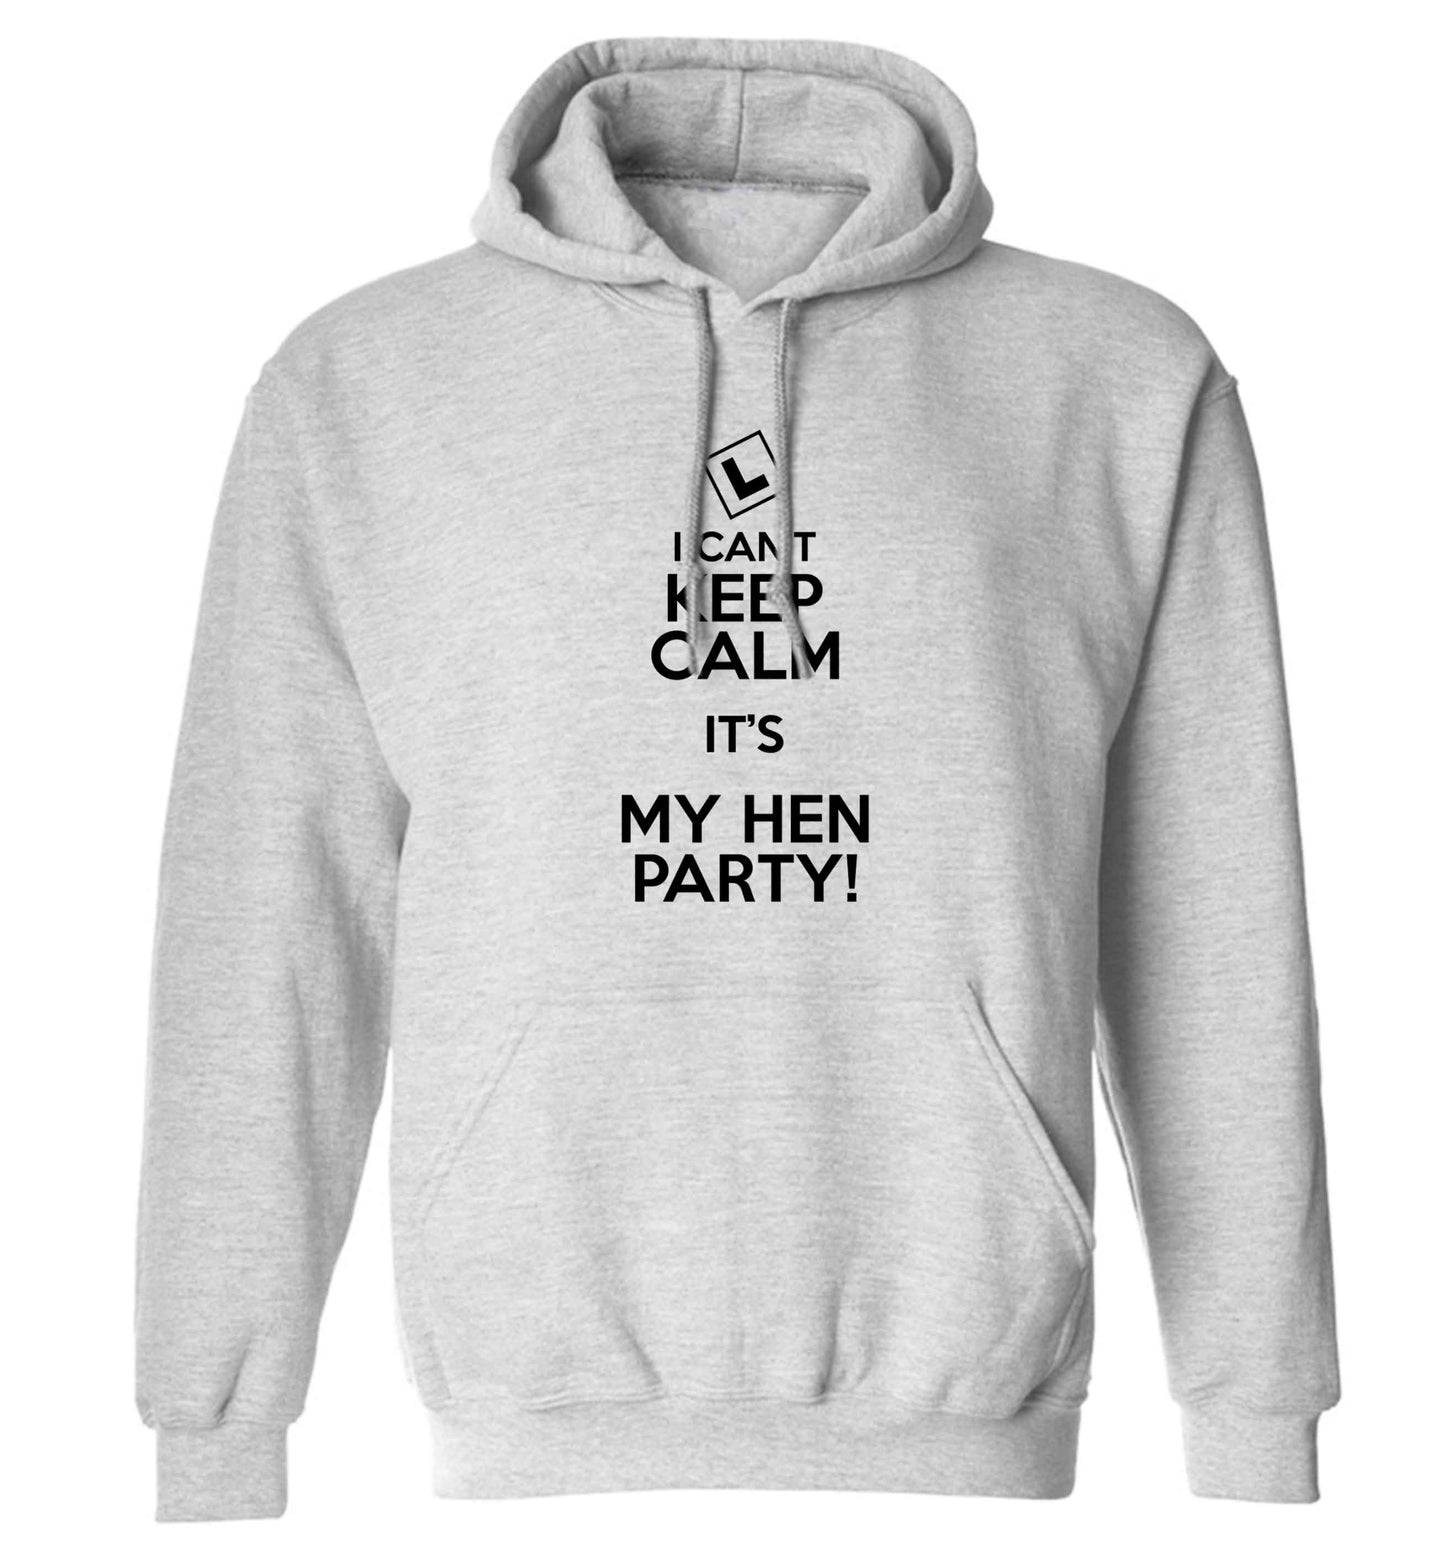 I can't keep calm it's my hen party adults unisex grey hoodie 2XL